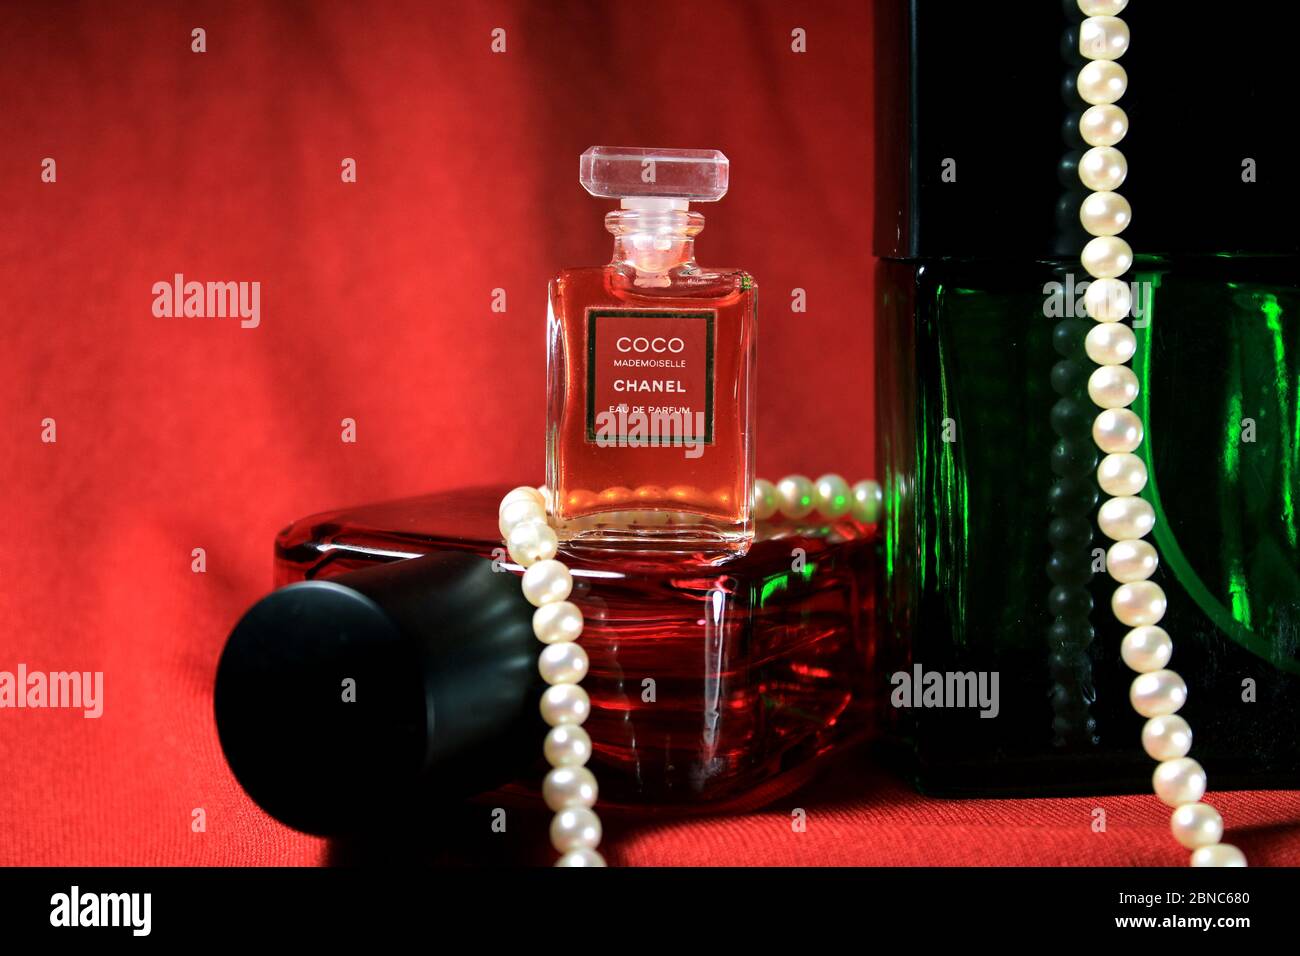 CHANEL Parisian Gentry Style Perfume and Oil, Gallery posted by JANNLEK